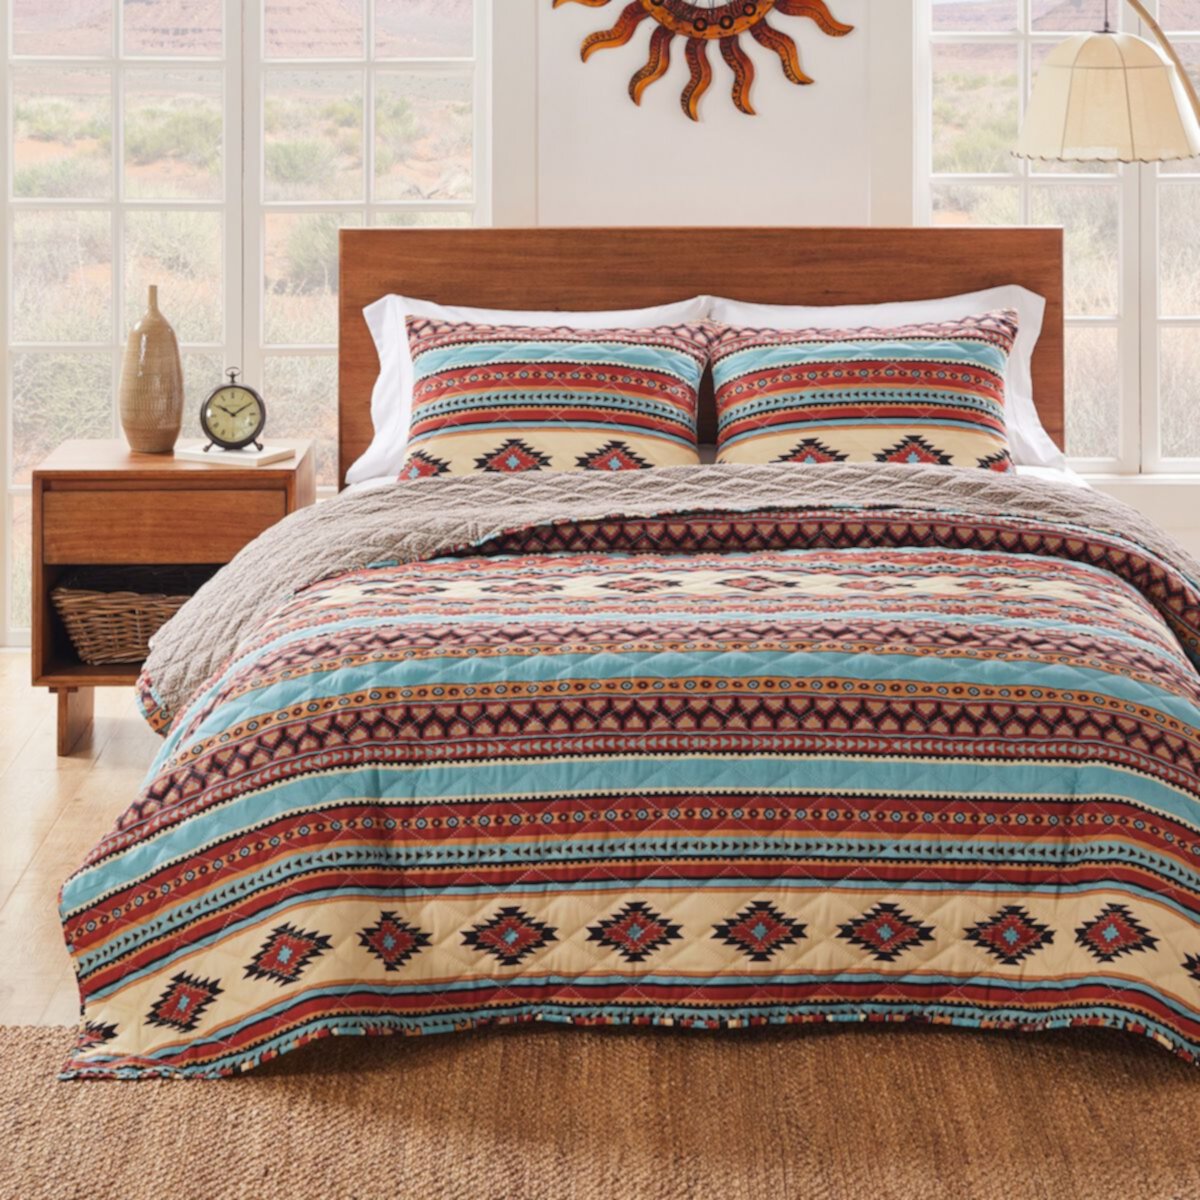 Greenland Home Fashions Red Rock Quilt and Pillow Sham Set - Clay Greenland Home Fashions